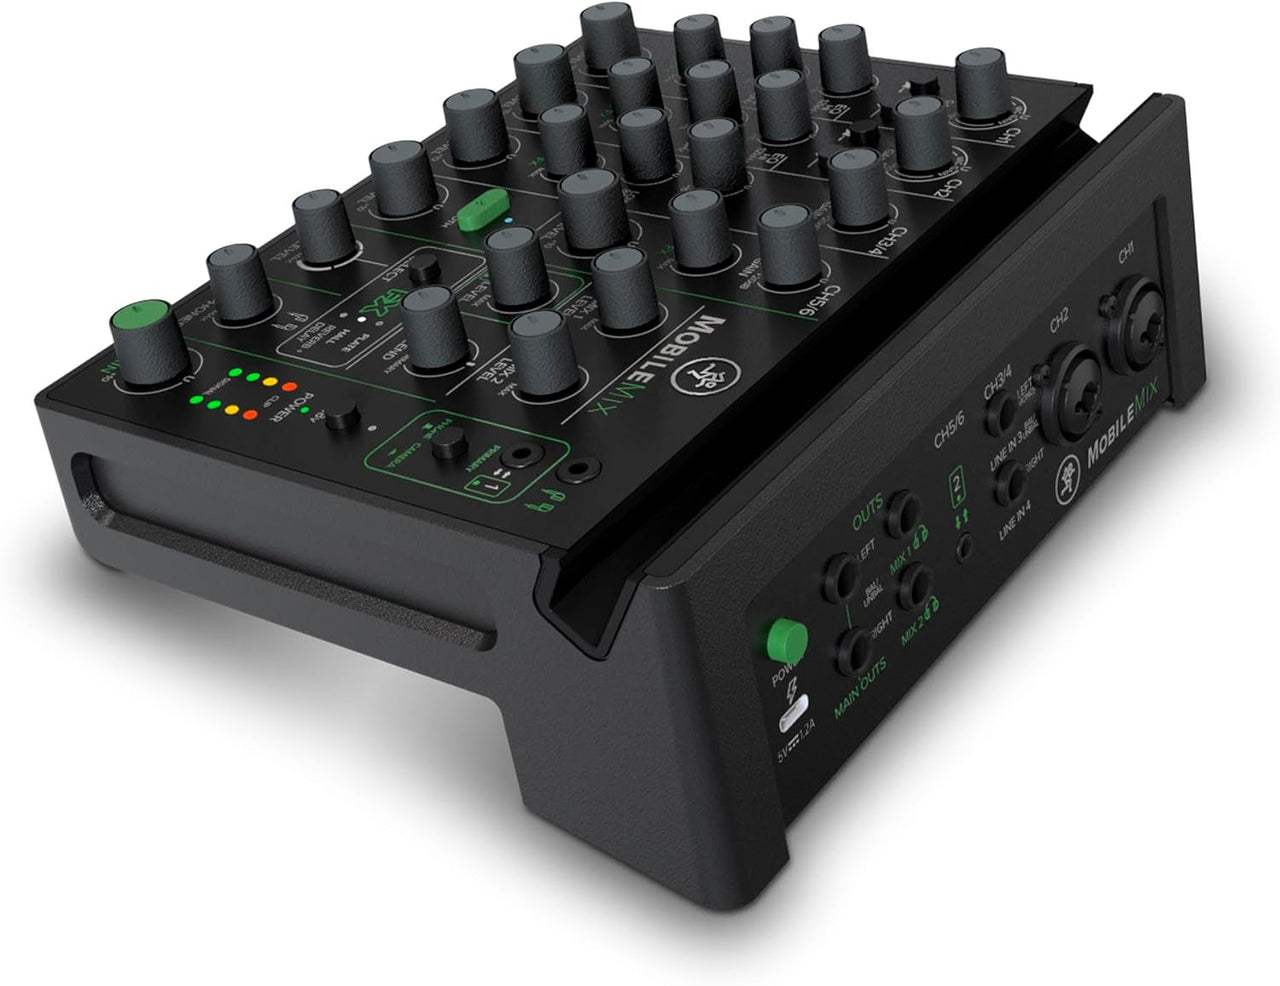 Mackie MobileMix 8-Channel USB-Powerable Mixer for Streaming and Recording with Smartphones and DSLR Cameras, Live Streaming with Instruments, Microphones, Bluetooth